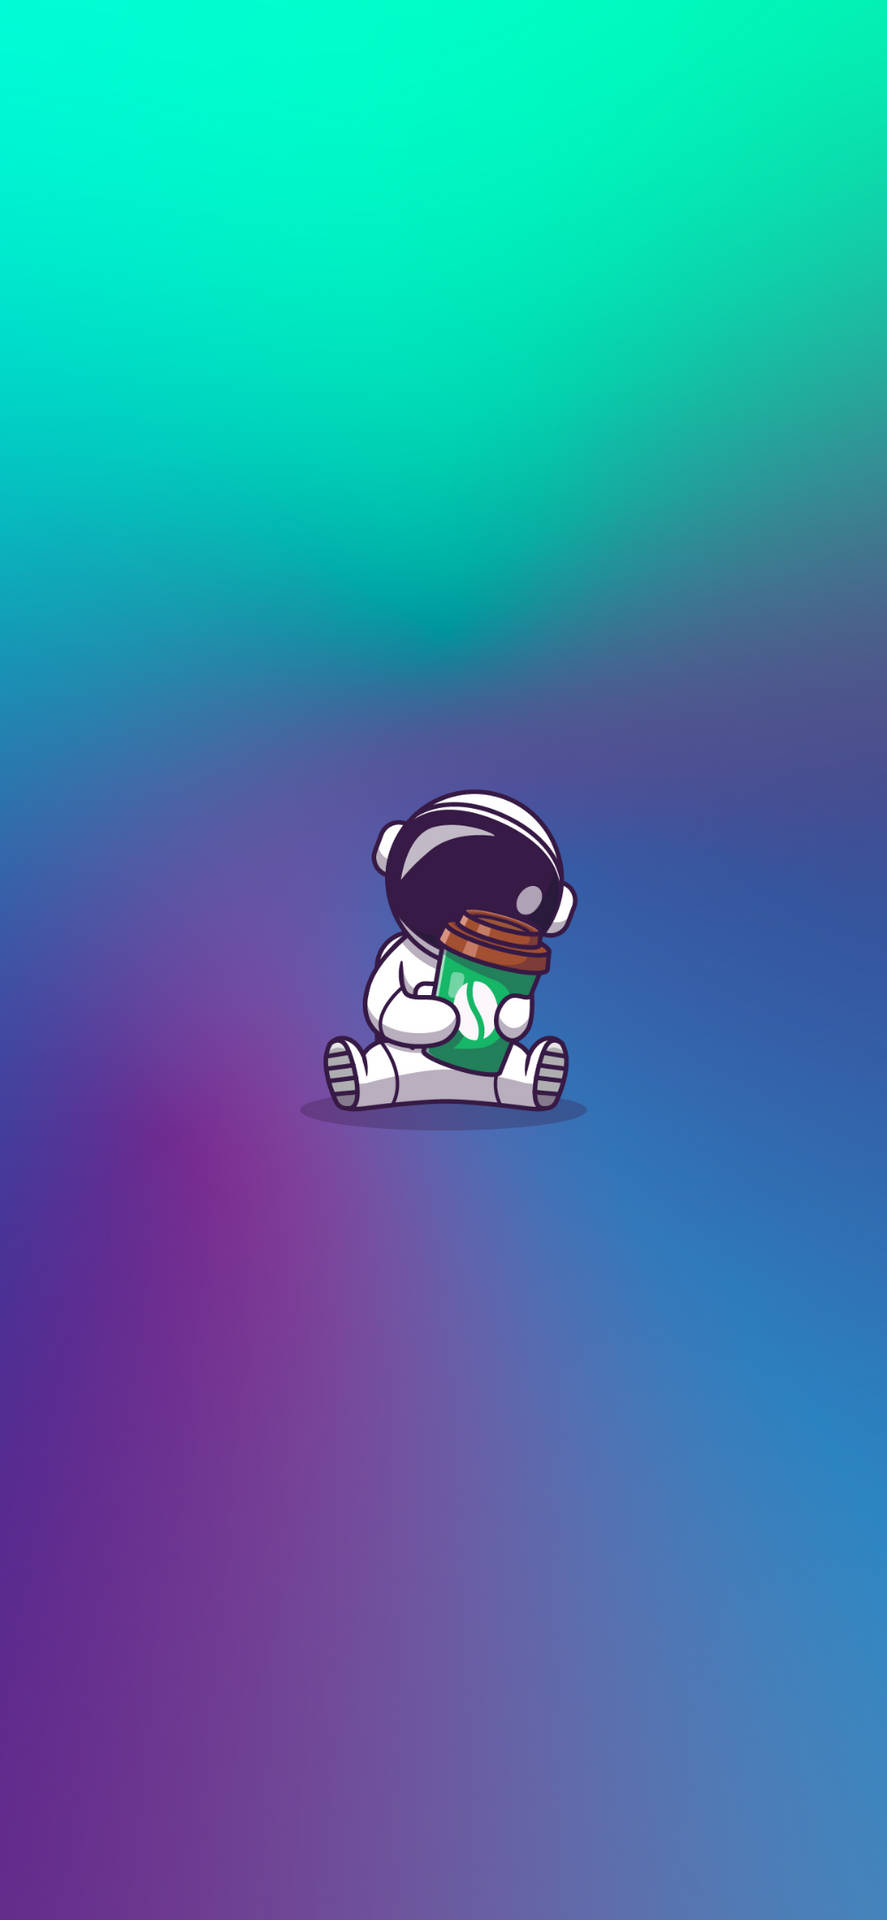 Cartoon Astronaut And Coffee Takeout Wallpaper